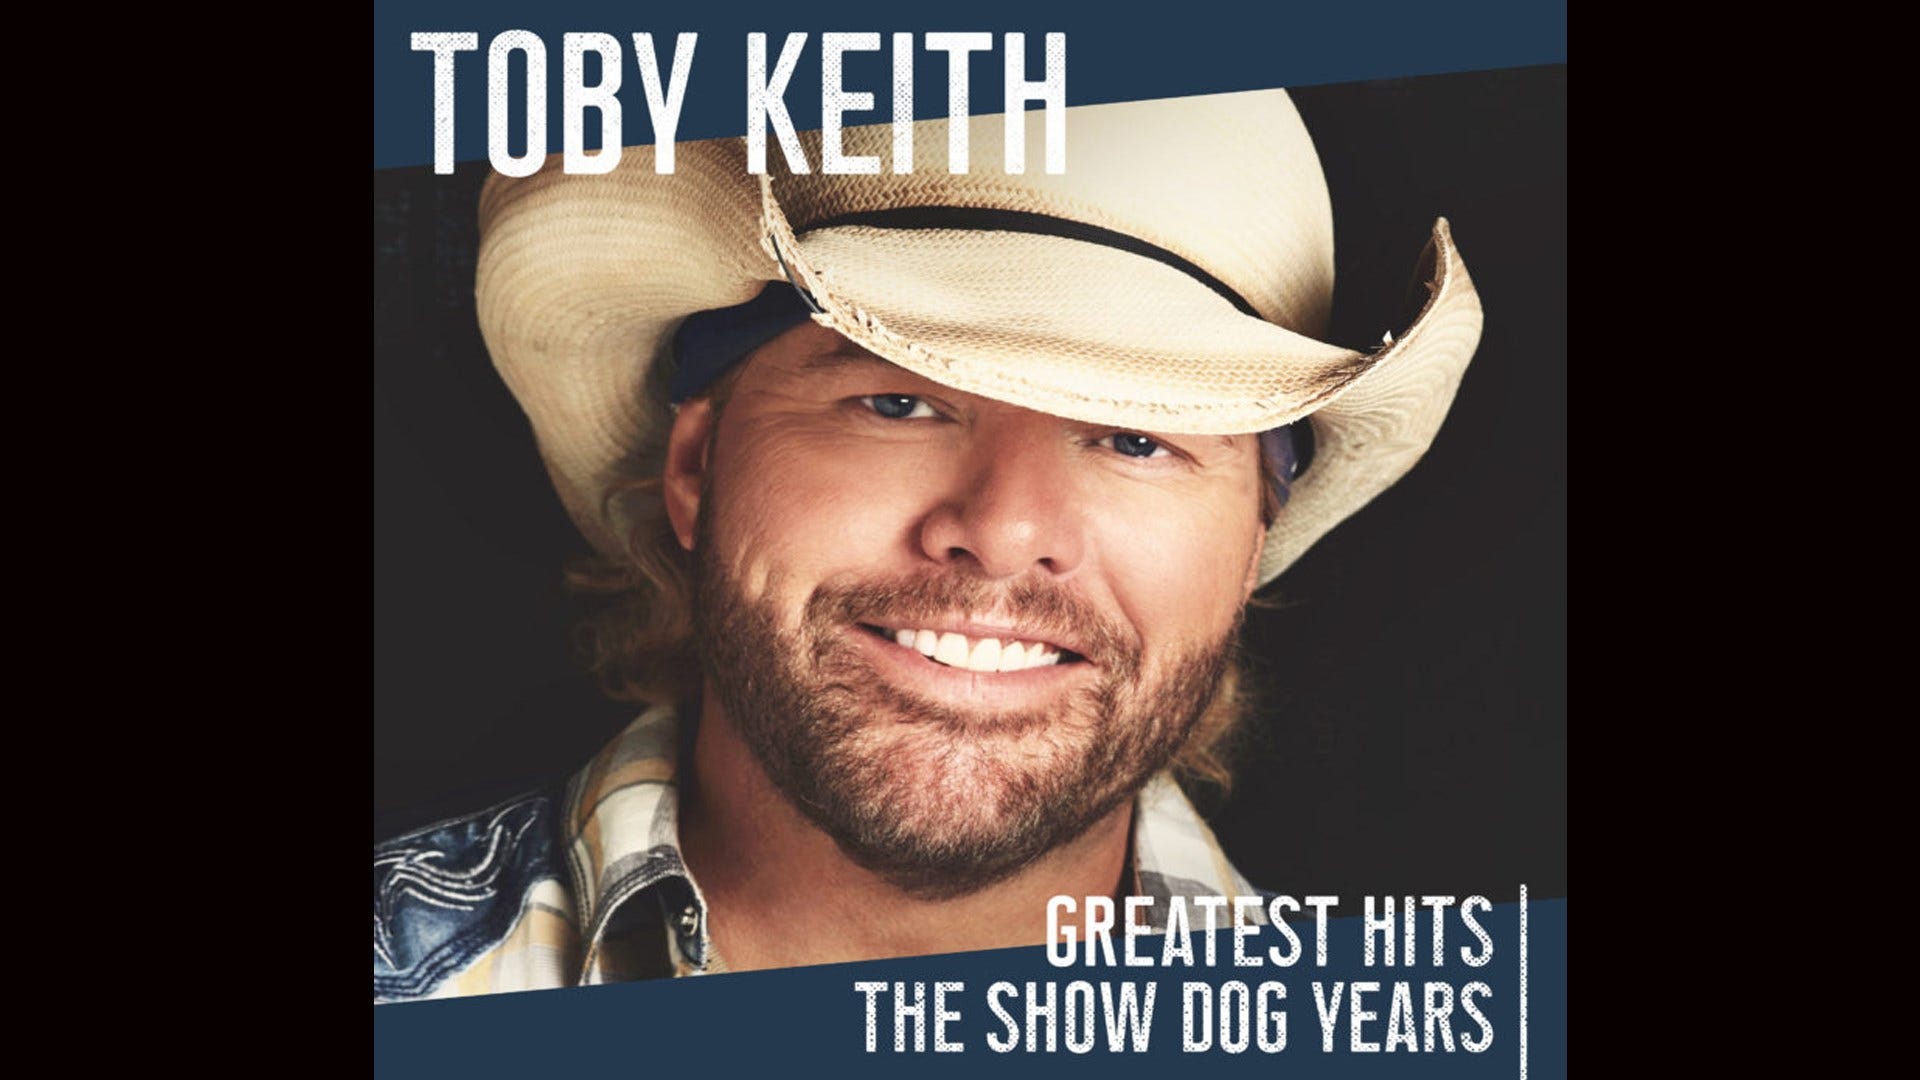 Toby Keith To Release New Greatest Hits Album